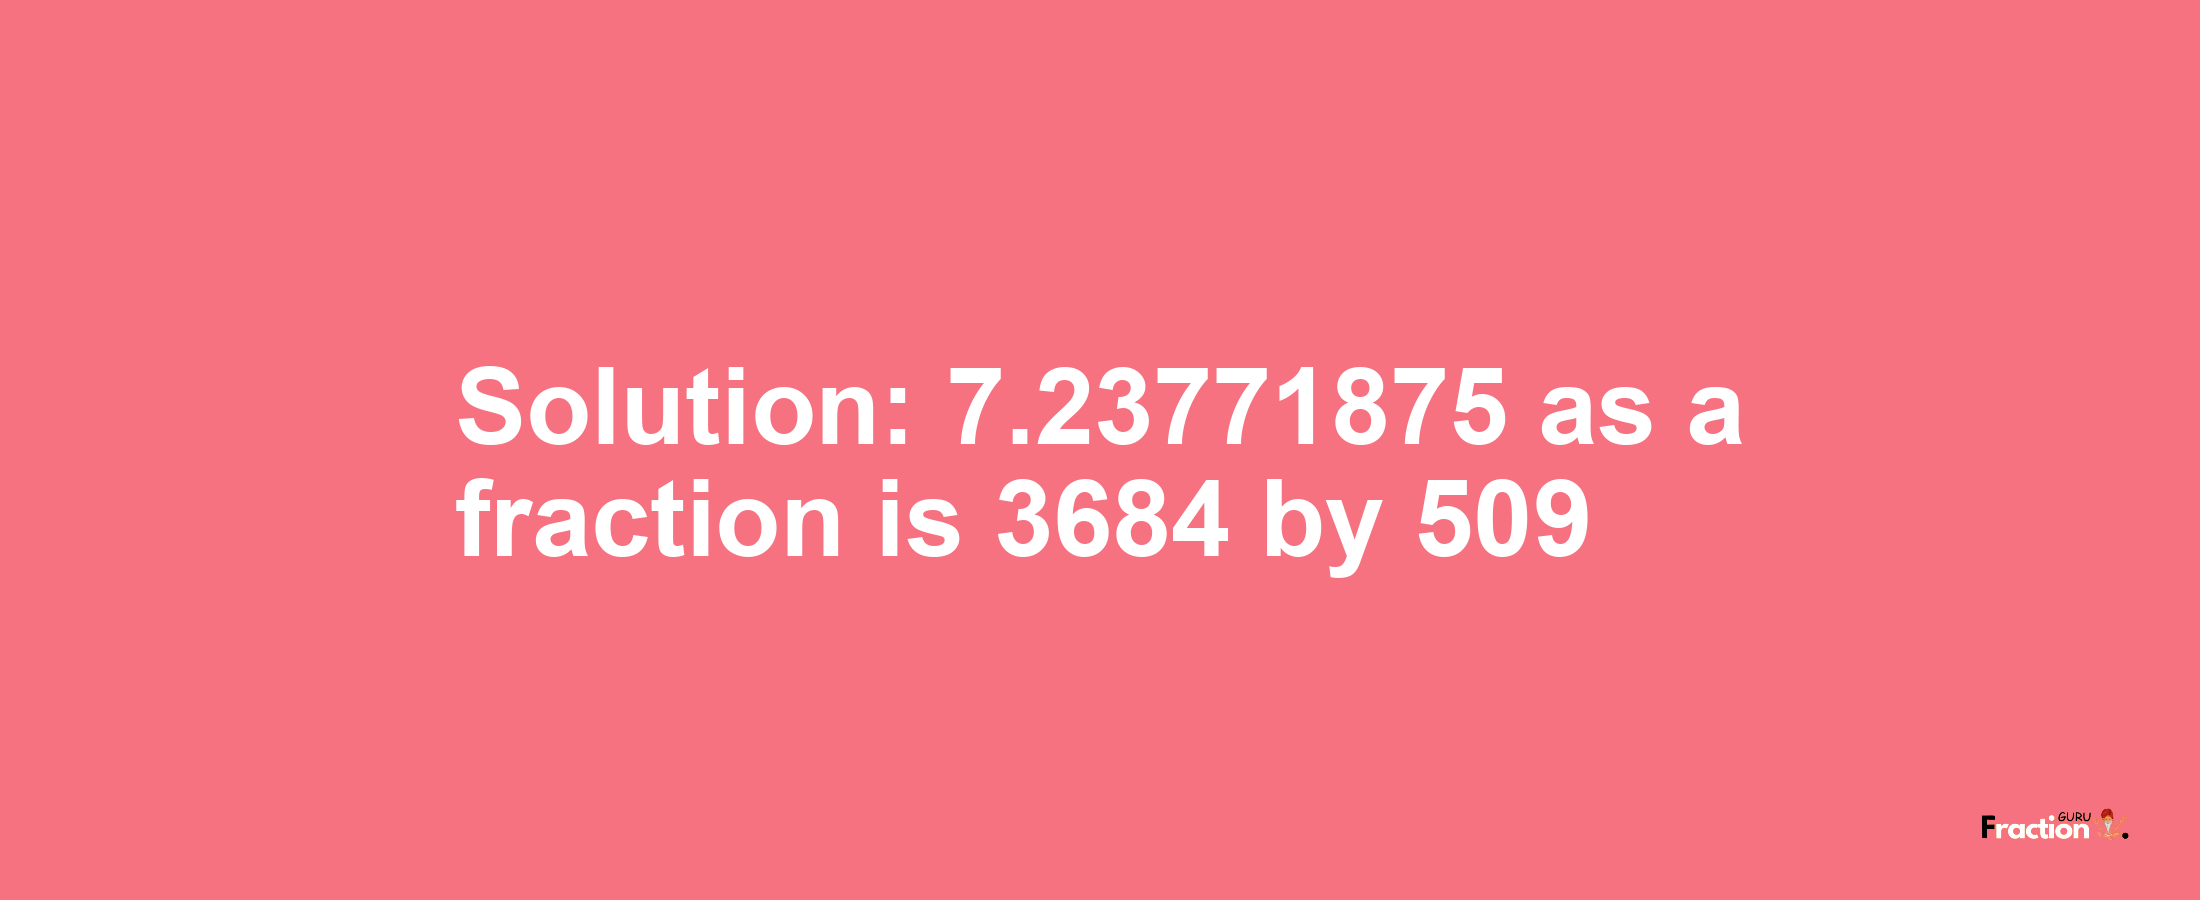 Solution:7.23771875 as a fraction is 3684/509